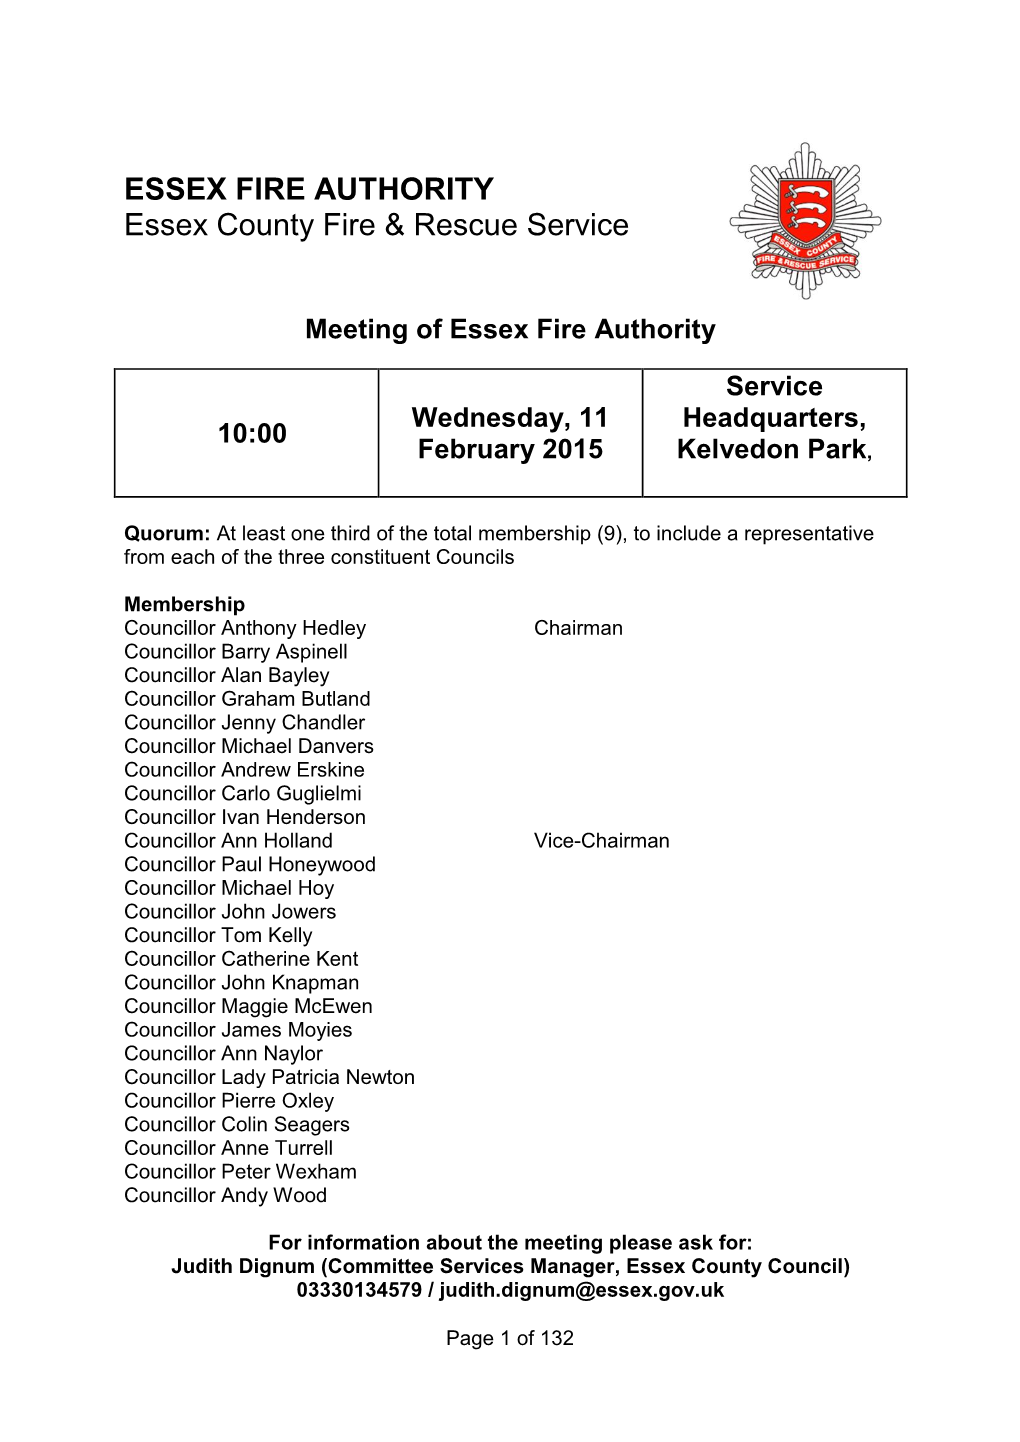 ESSEX FIRE AUTHORITY Essex County Fire & Rescue Service